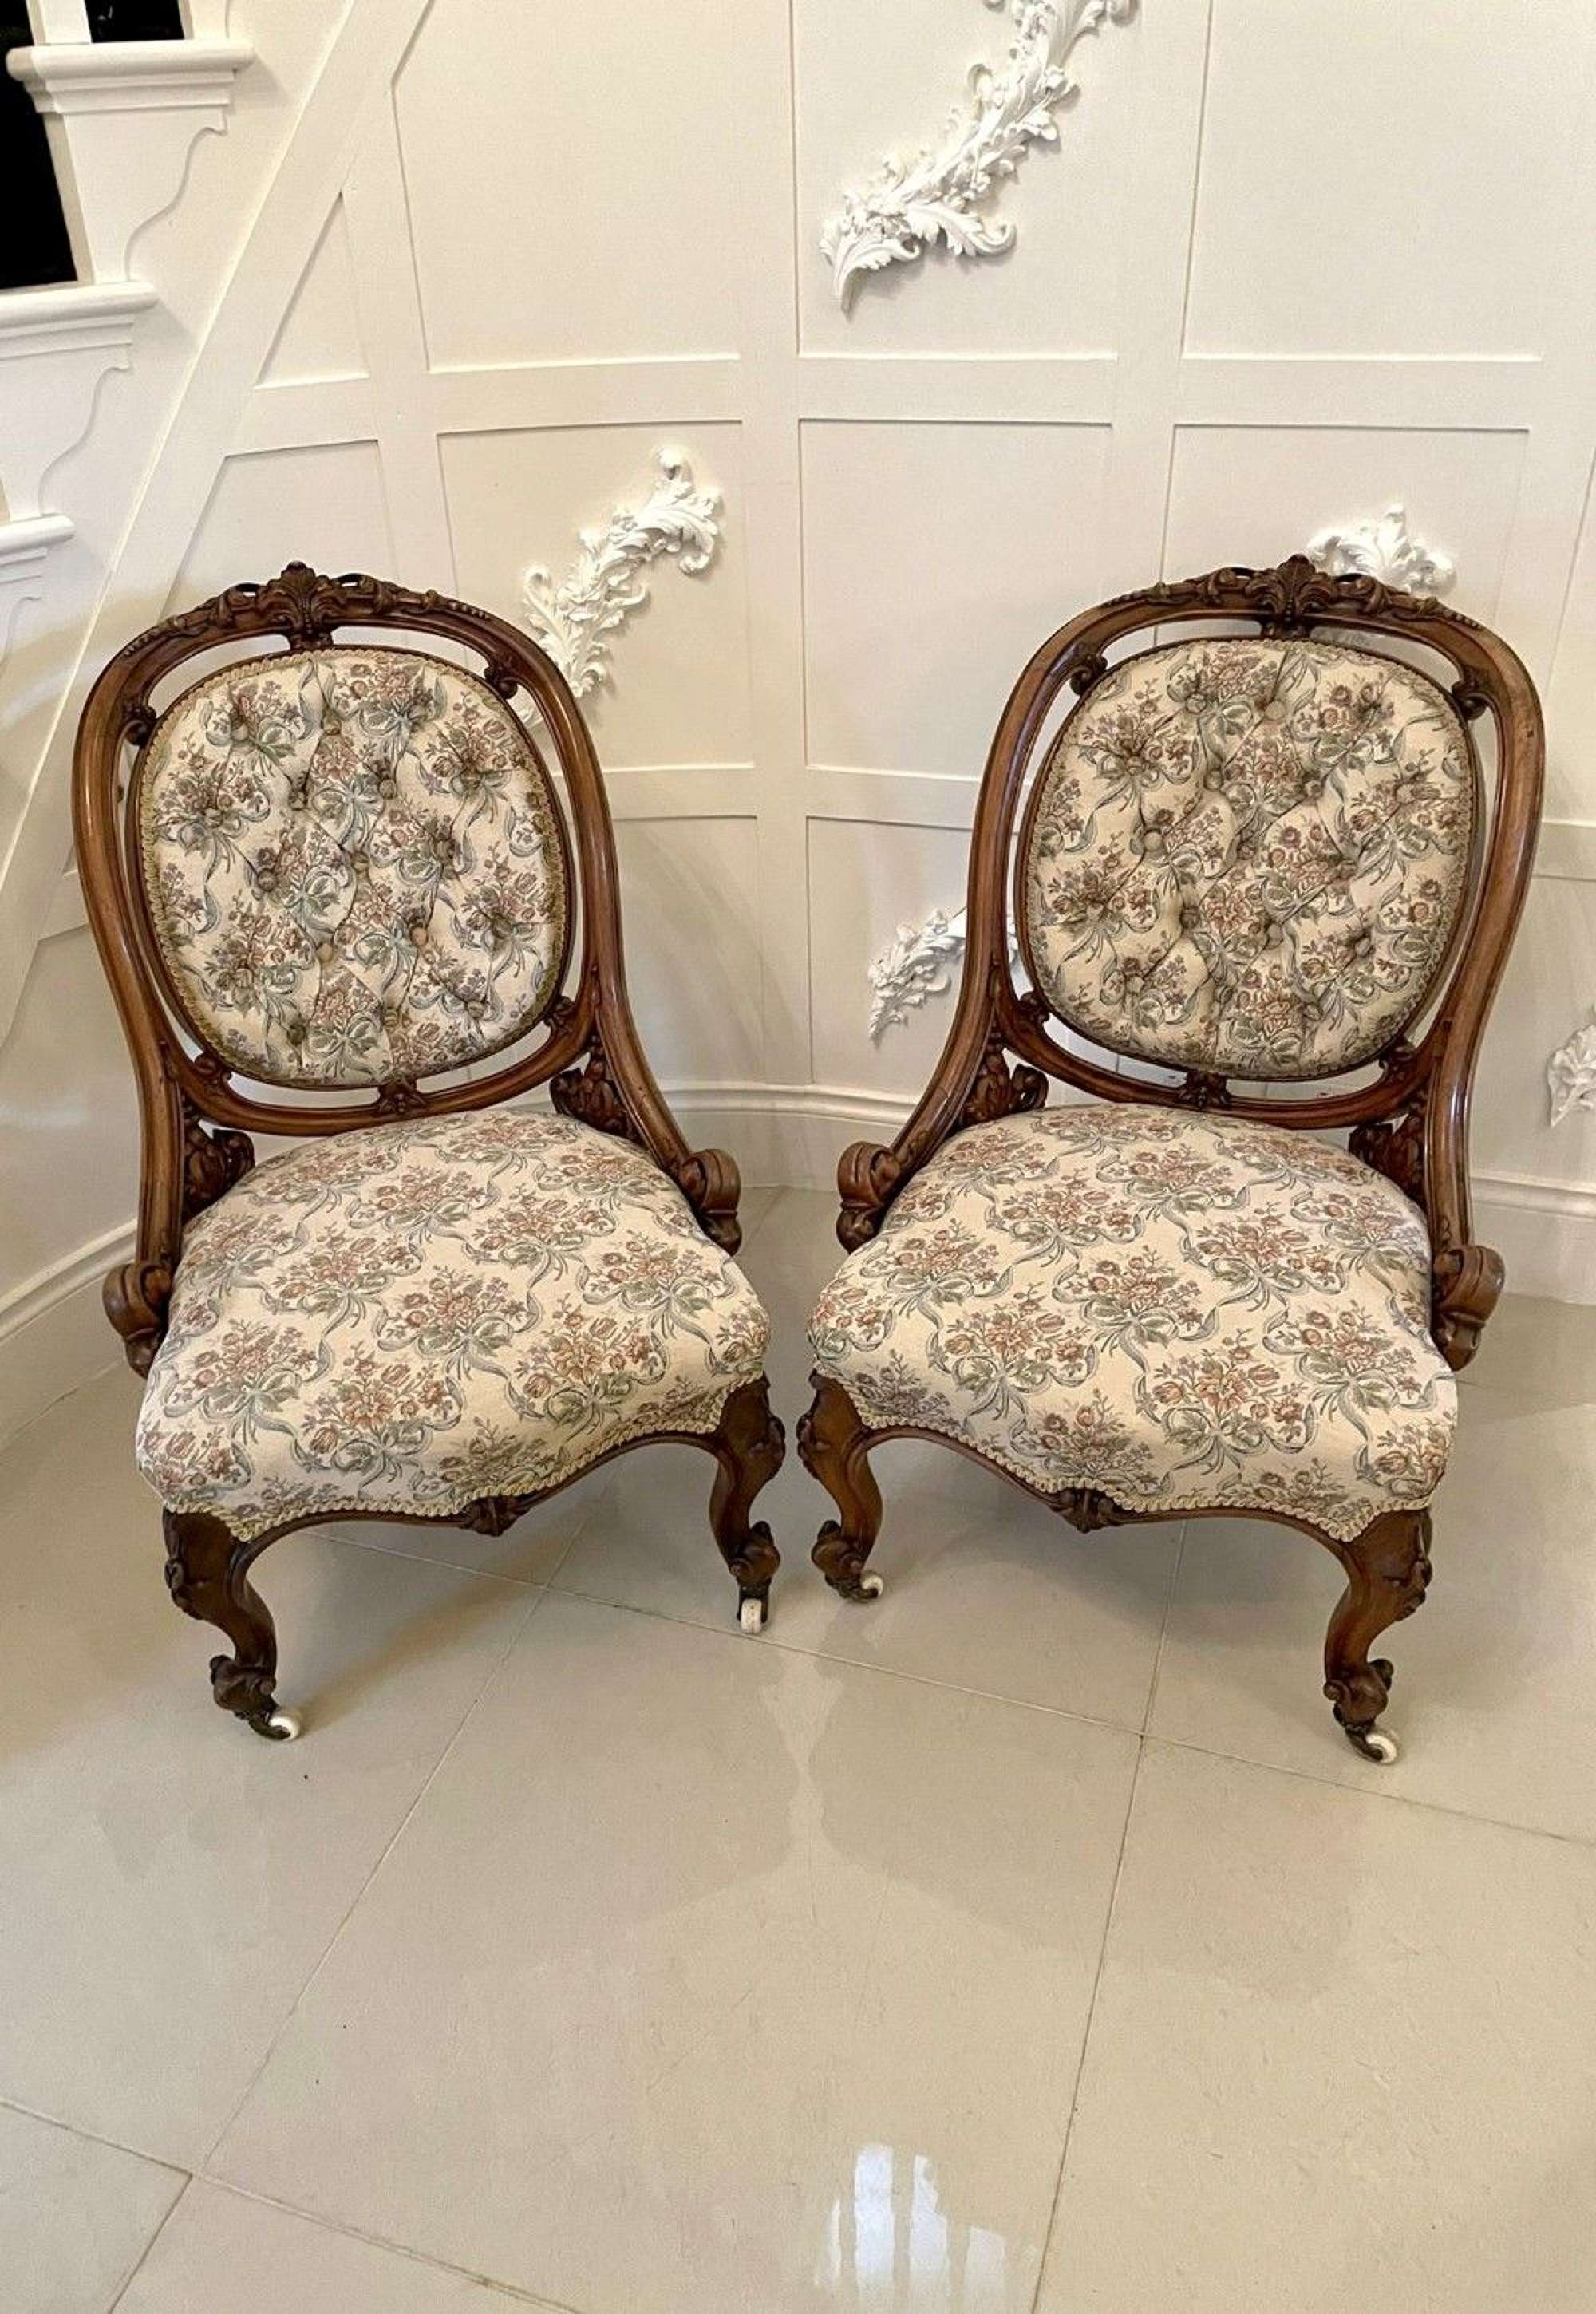 Outstanding Quality Antique Victorian Pair Of Carved Walnut Chairs